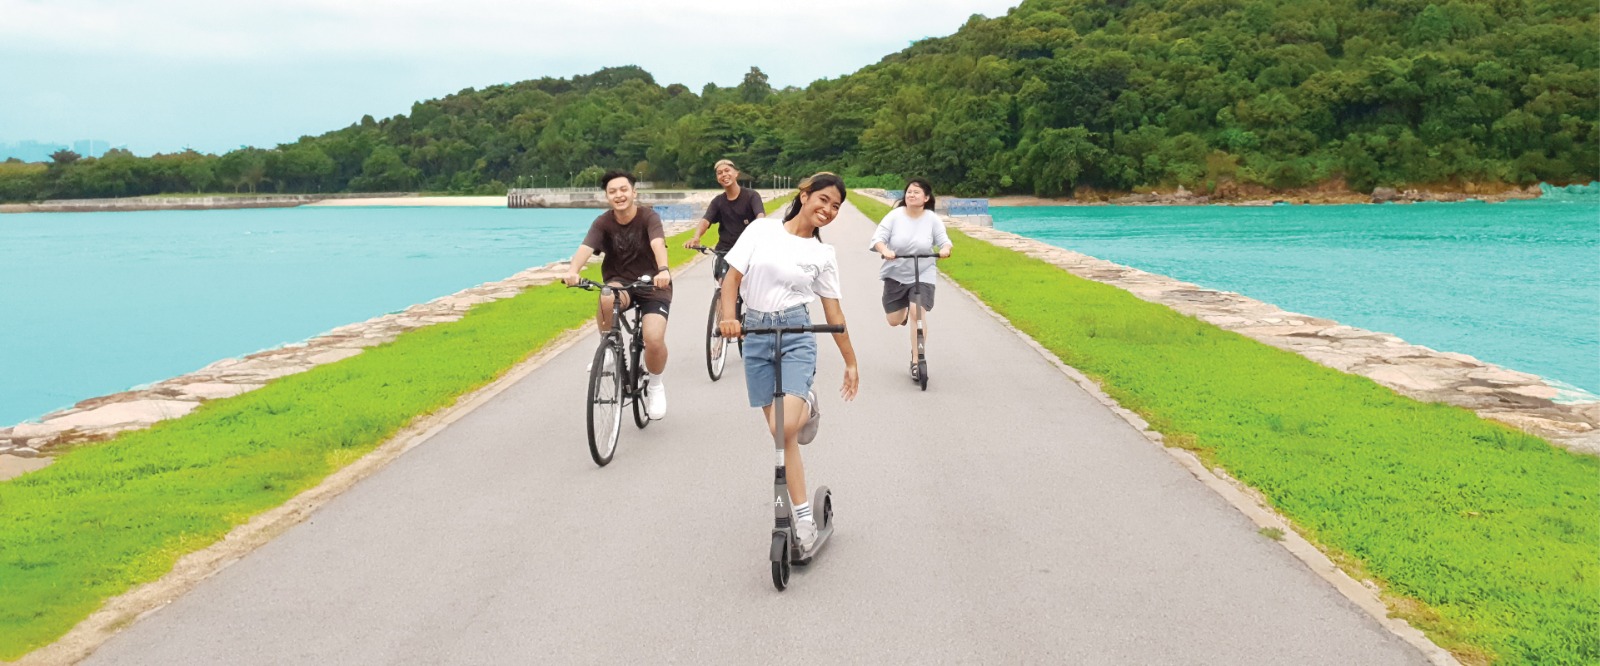 Fun group cycling and kickscooter over at St John Island with friends with Gogreen